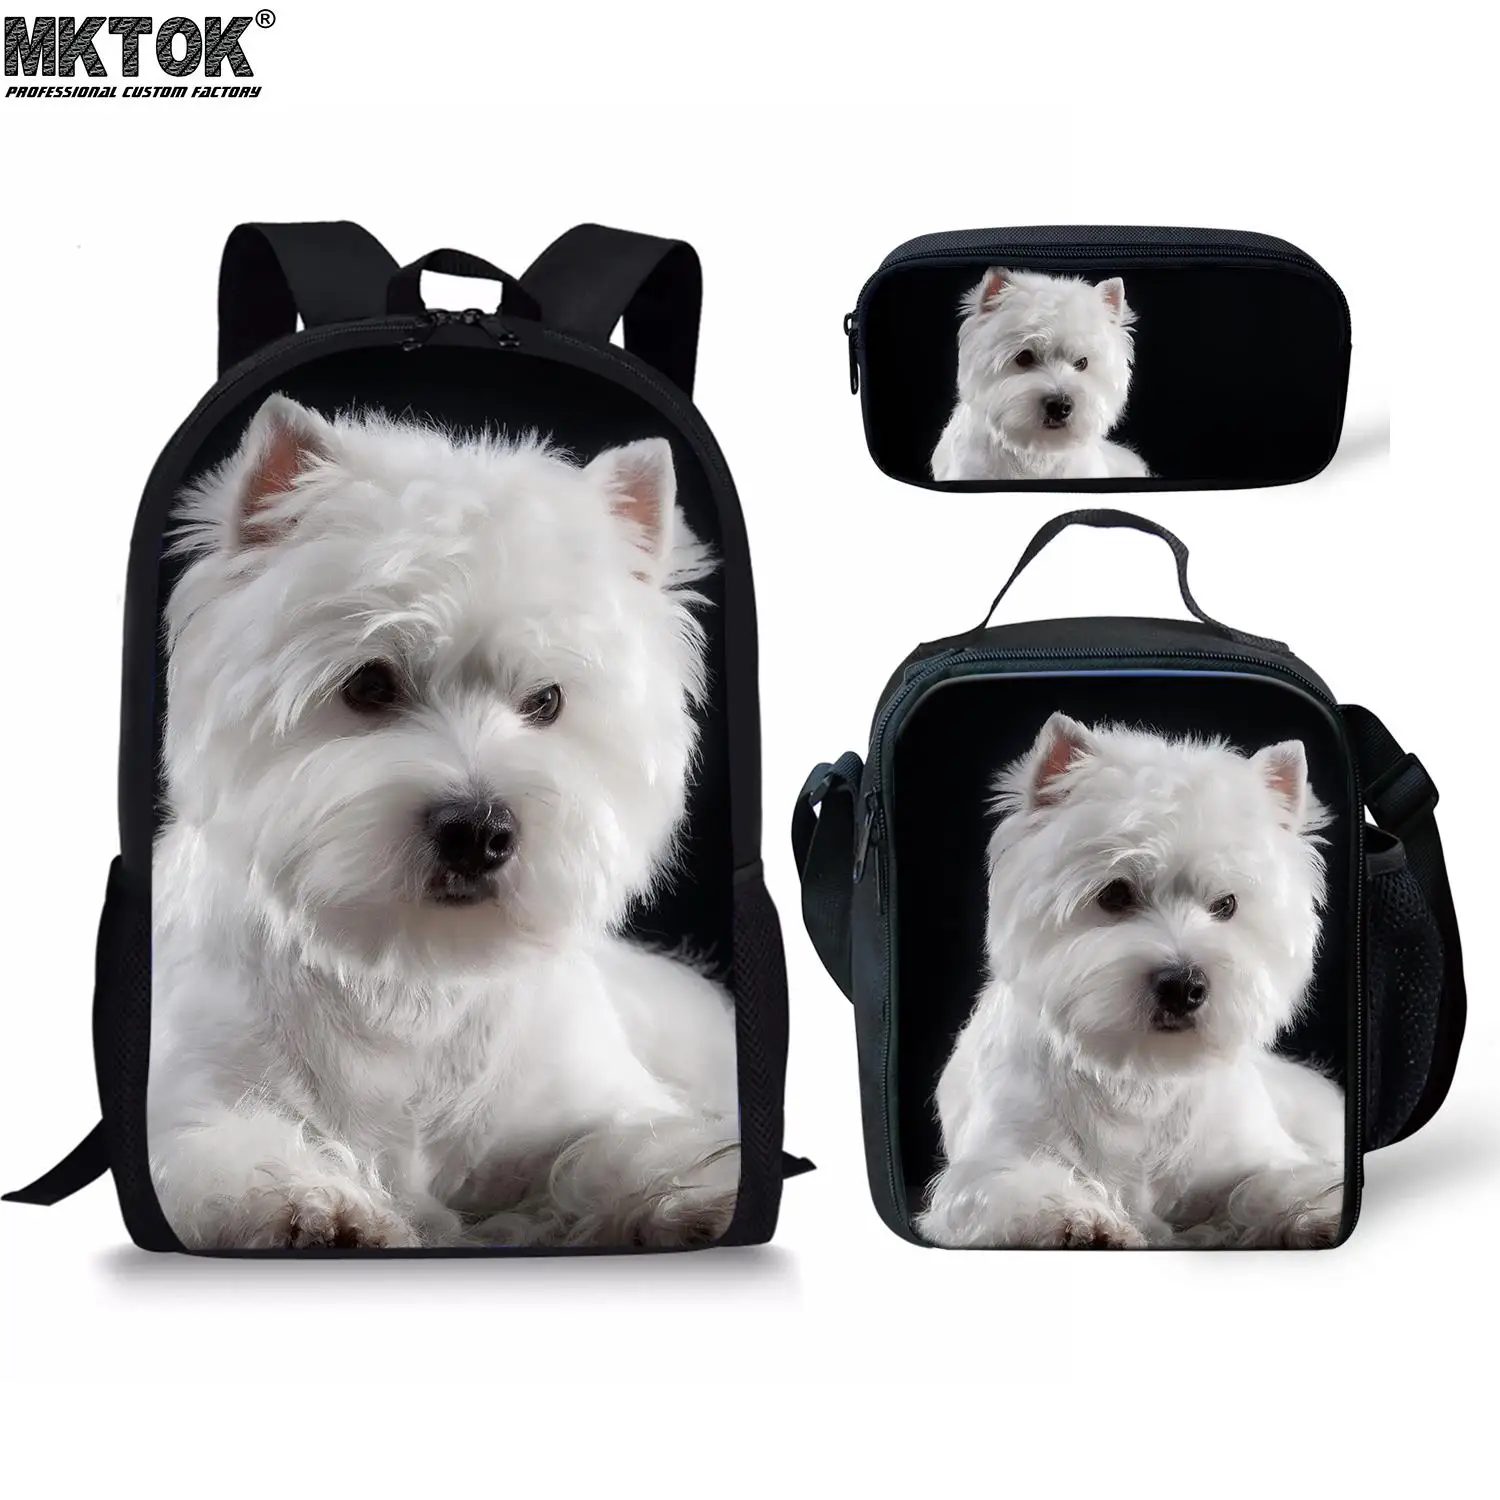 

2022 Trend West Highland Terrier Pattern Girls 3pcs School Bags Cute Students Satchel Premium Children's Backpack Free Shipping